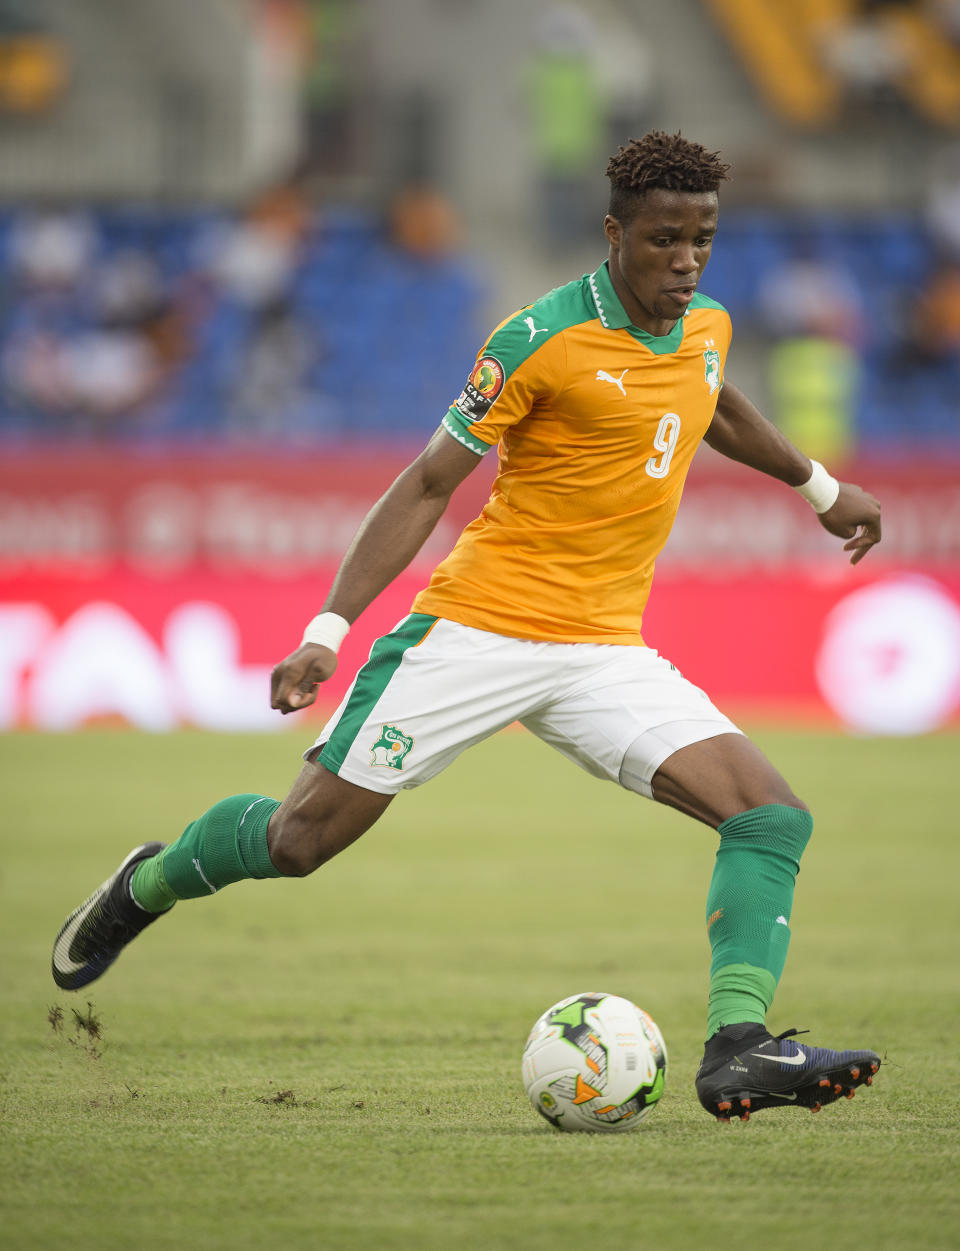 Wilfried Zaha’s Ivory Coast are one match from making it to the finals